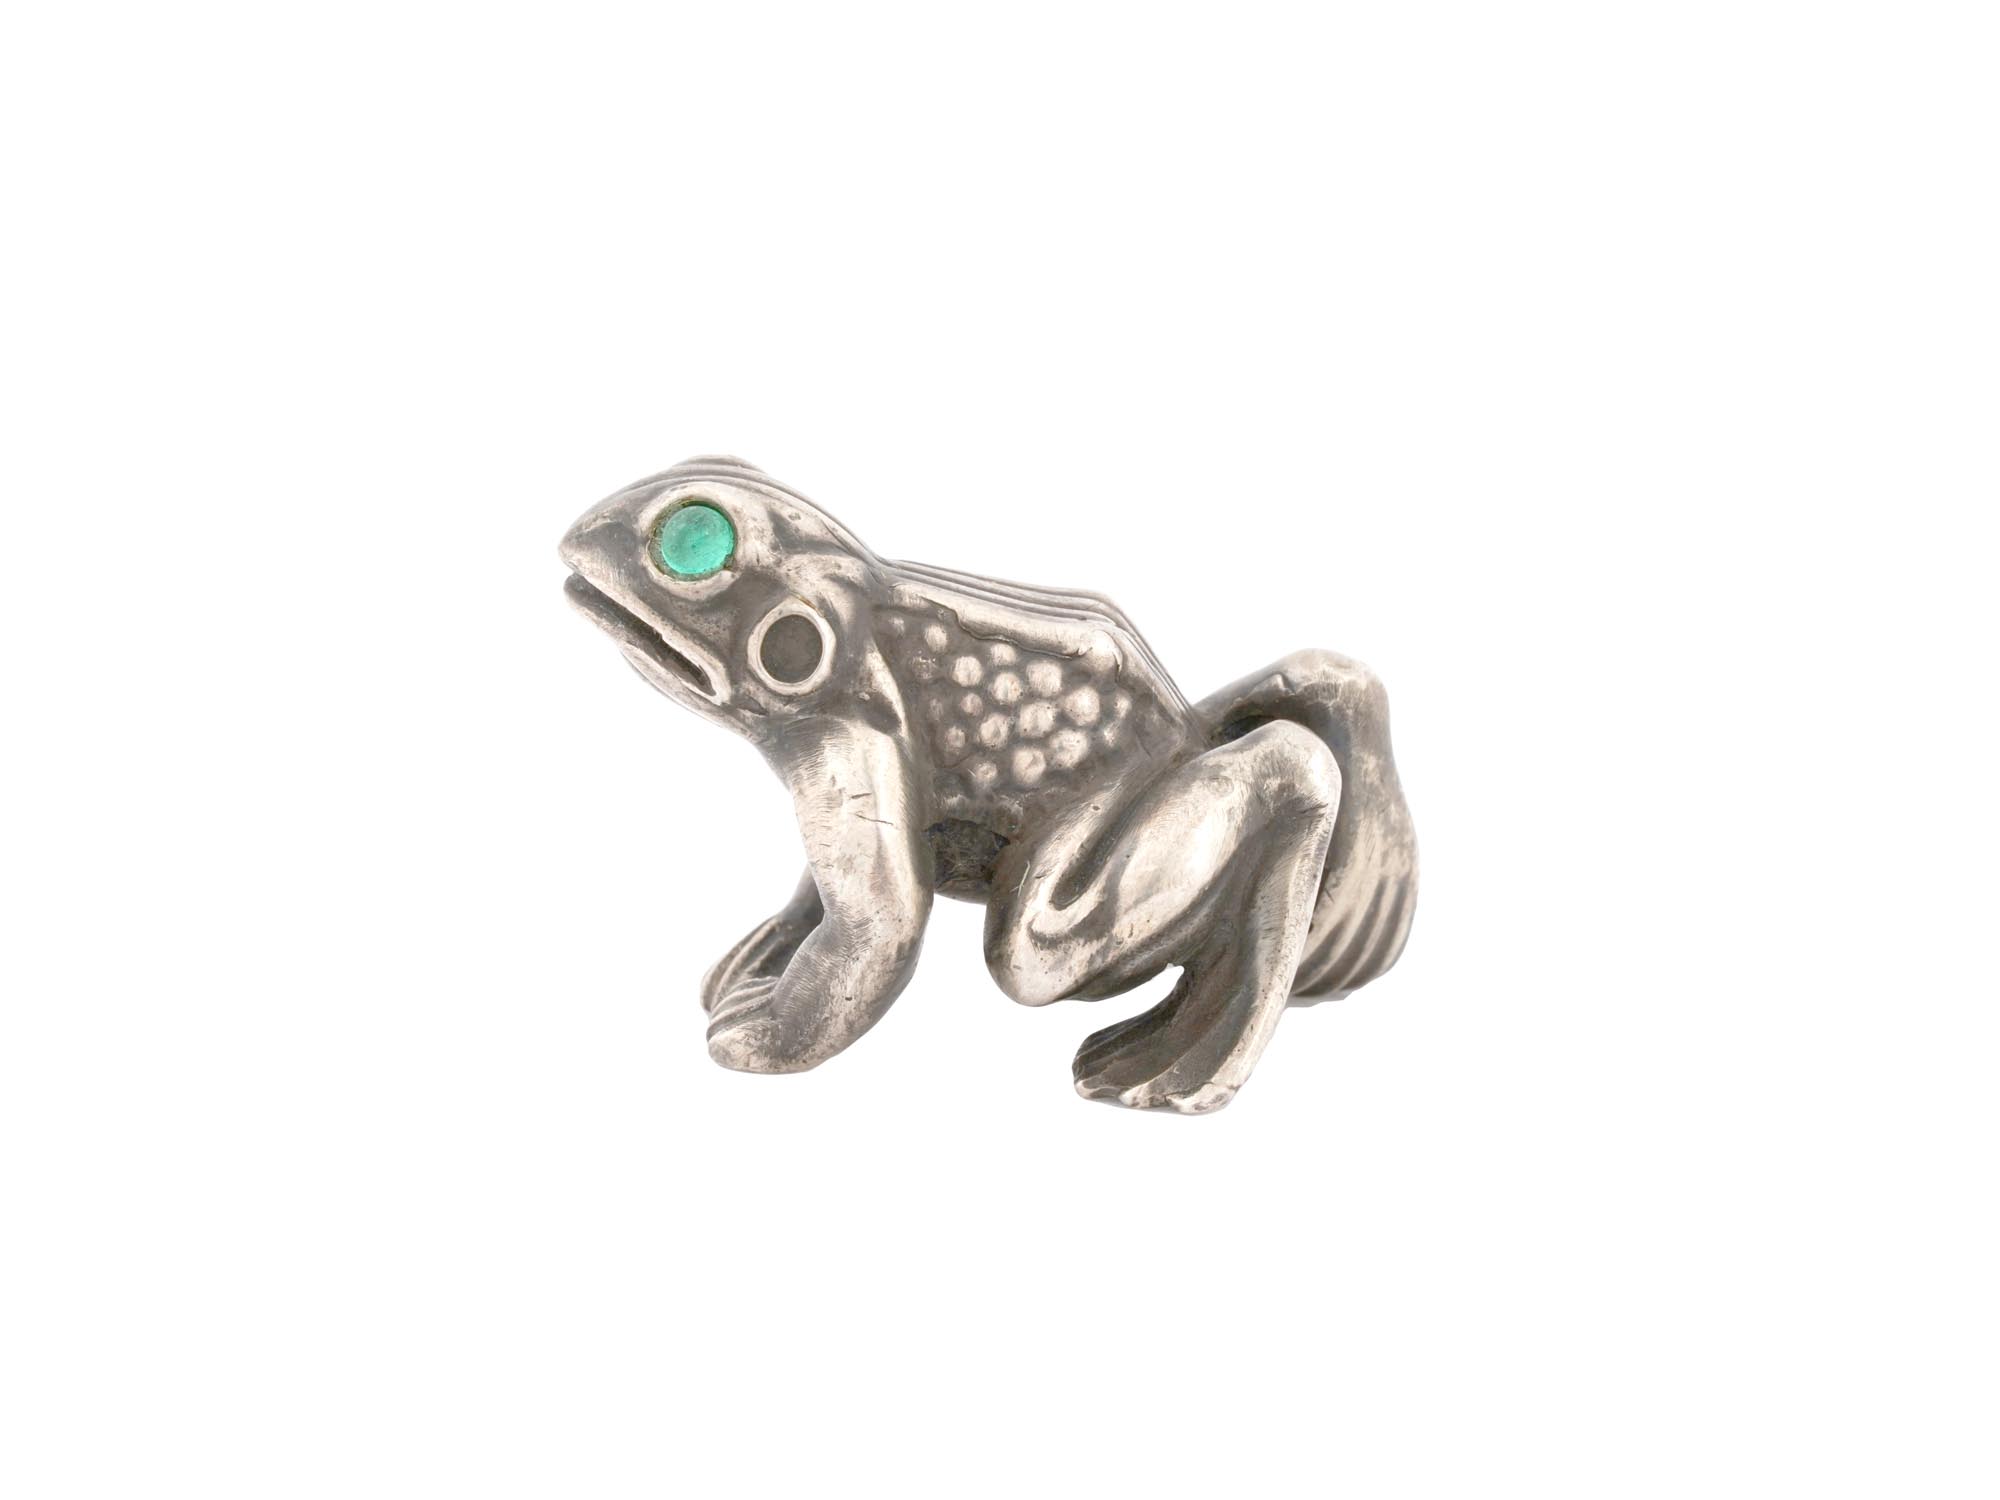 RUSSIAN SILVER FIGURE OF FROG WITH EMERALD EYES PIC-1